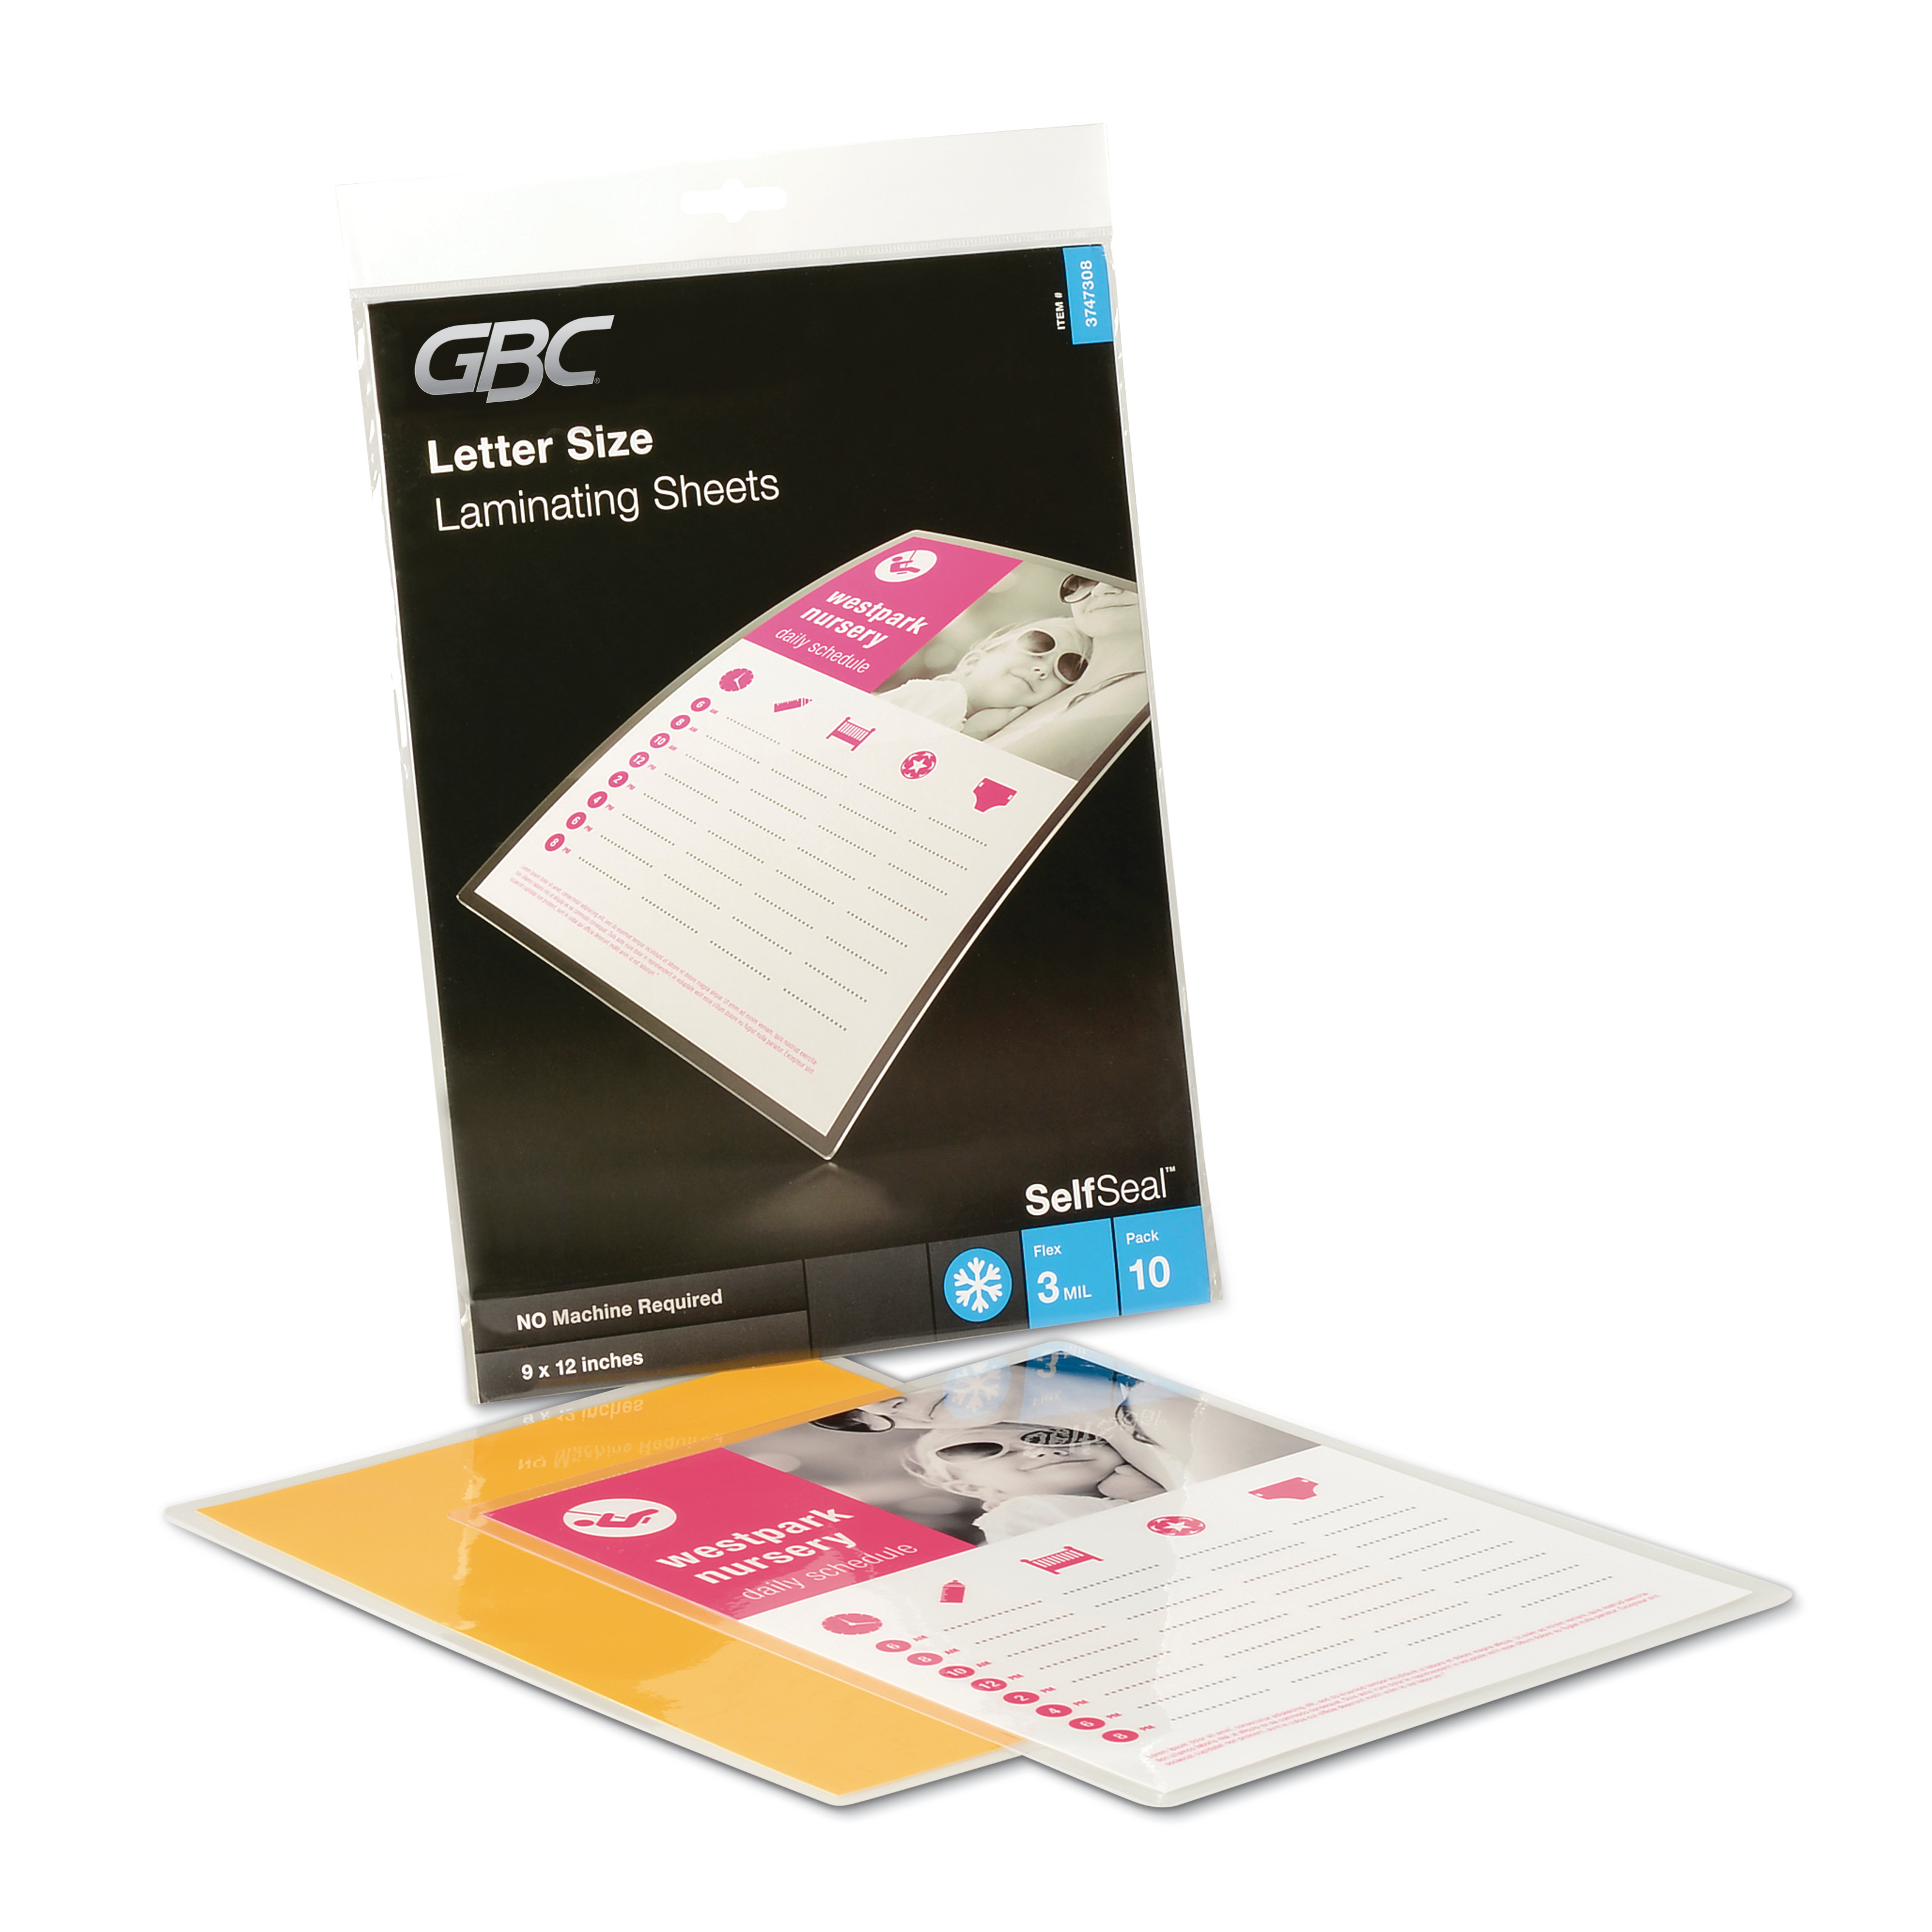  GBC 3747308CF SelfSeal Self-Adhesive Laminating Pouches and Single-Sided Sheets, 3 mil, 9 x 12, Gloss Clear, 10/Pack (GBC3747308) 